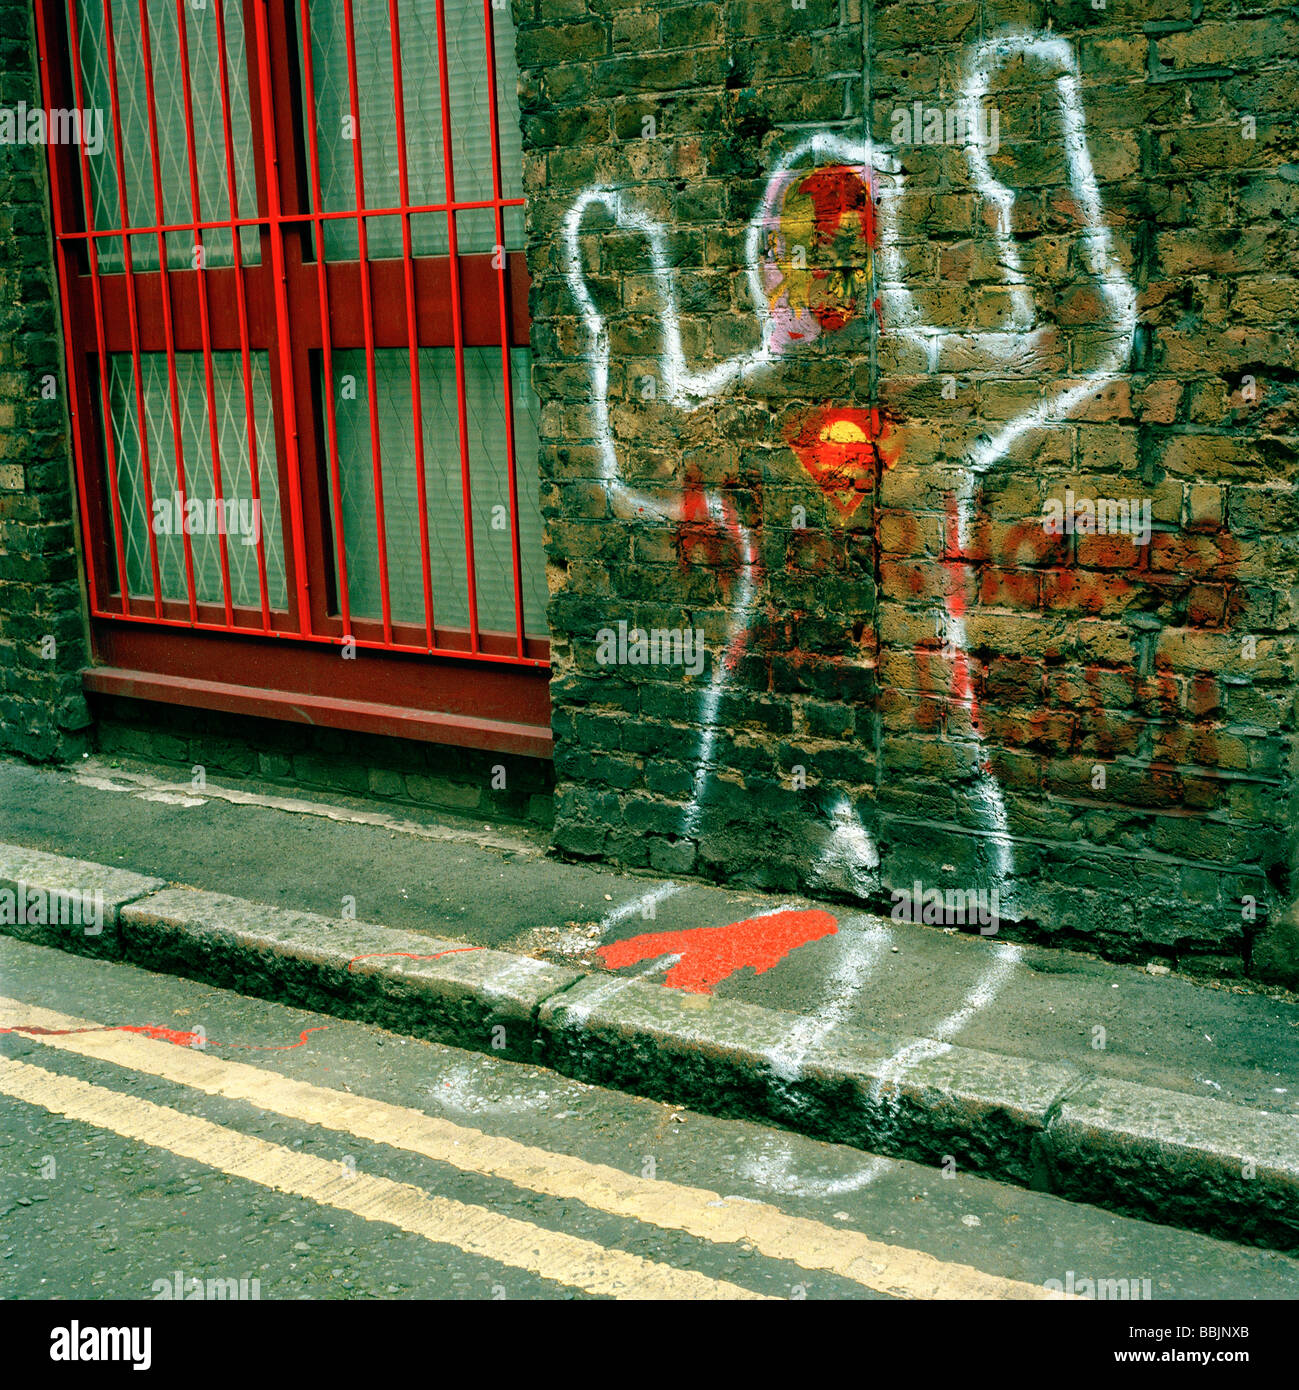 Outline of a man with a Superman symbol sprayed on a wall near Old Street, London Stock Photo